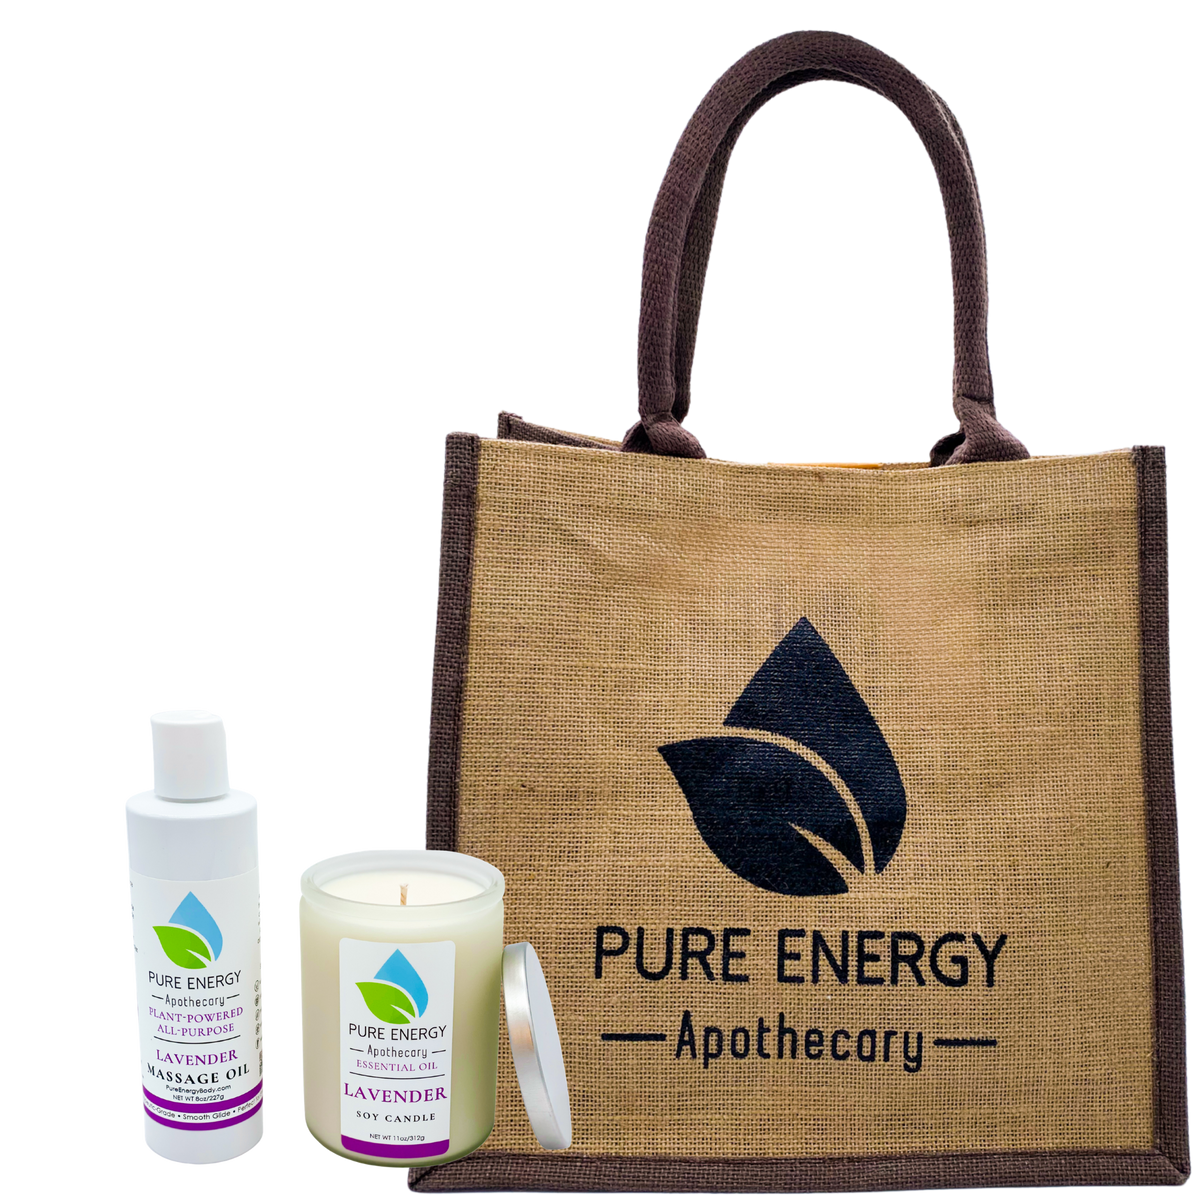 Relaxing Ritual Gift Set (Lavender) by Pure Energy Apothecary